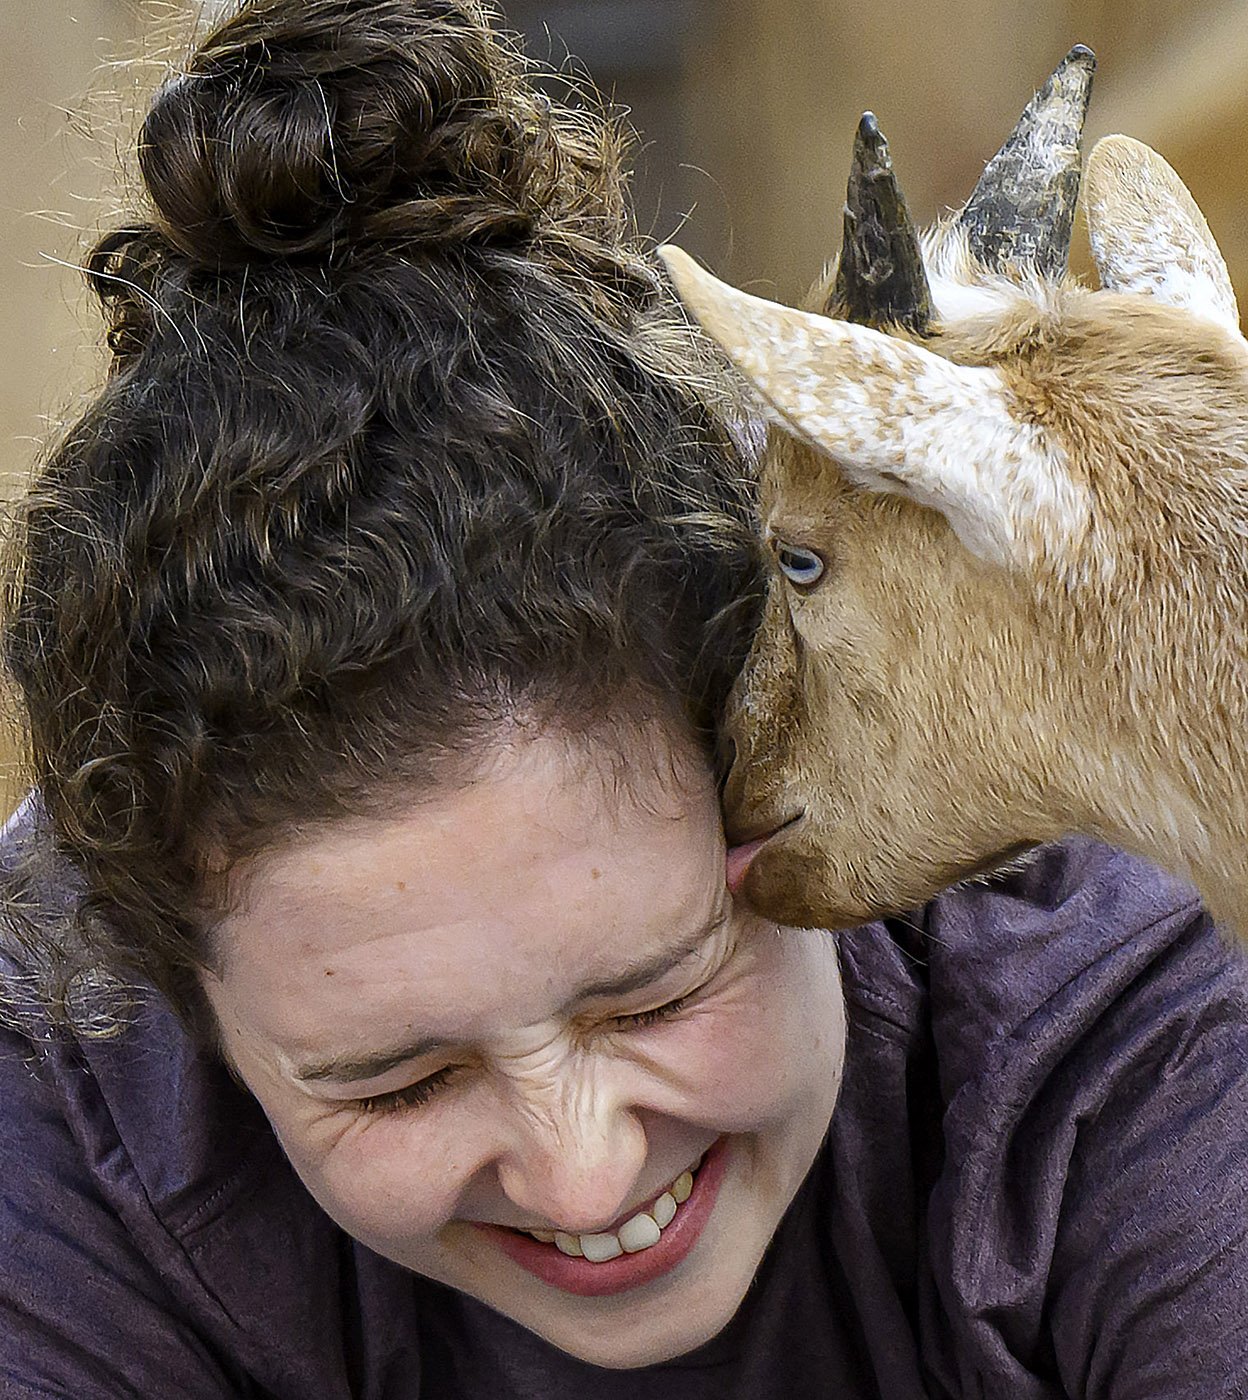  A goat plants a wet kiss on Annika Nelson’s cheek during Yin Yoga class at Goods and Goats in San Juan Capistrano on Sunday, August 28, 2022. Goat yoga is a popular feature at the farm.  